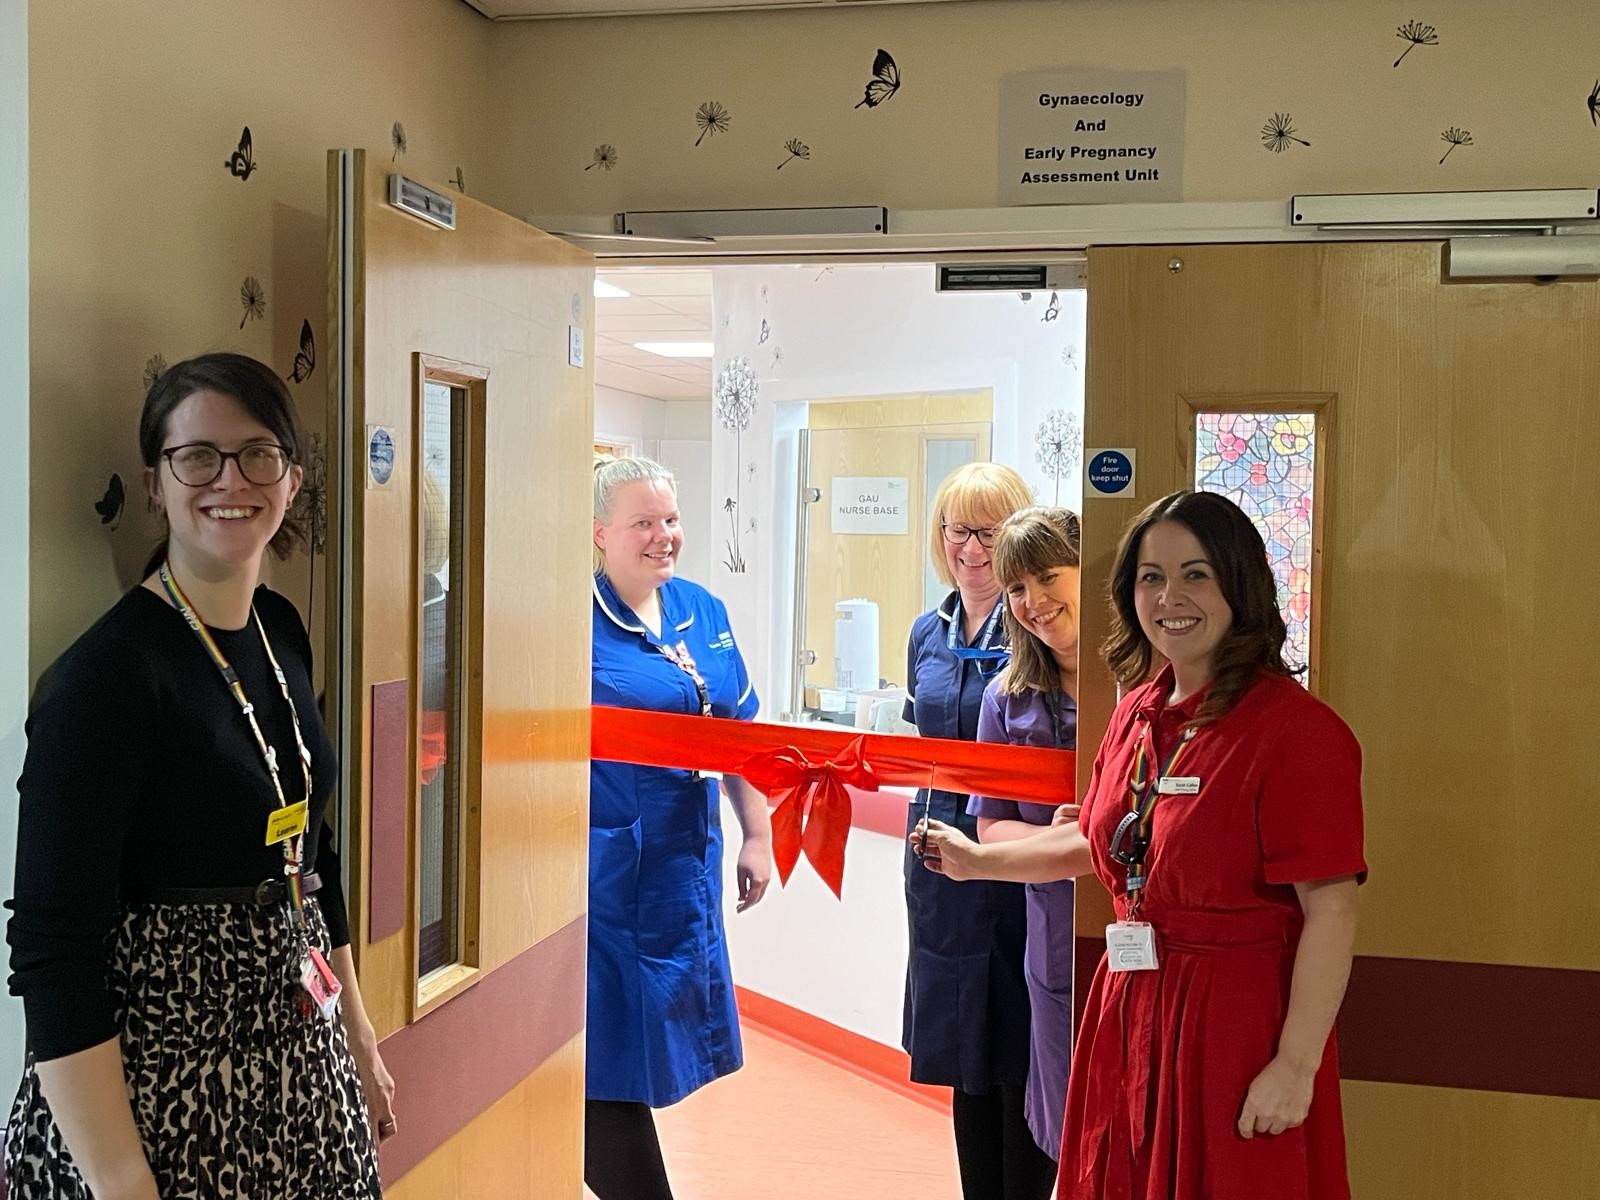 Staff members cutting red ribbon in front of entrance